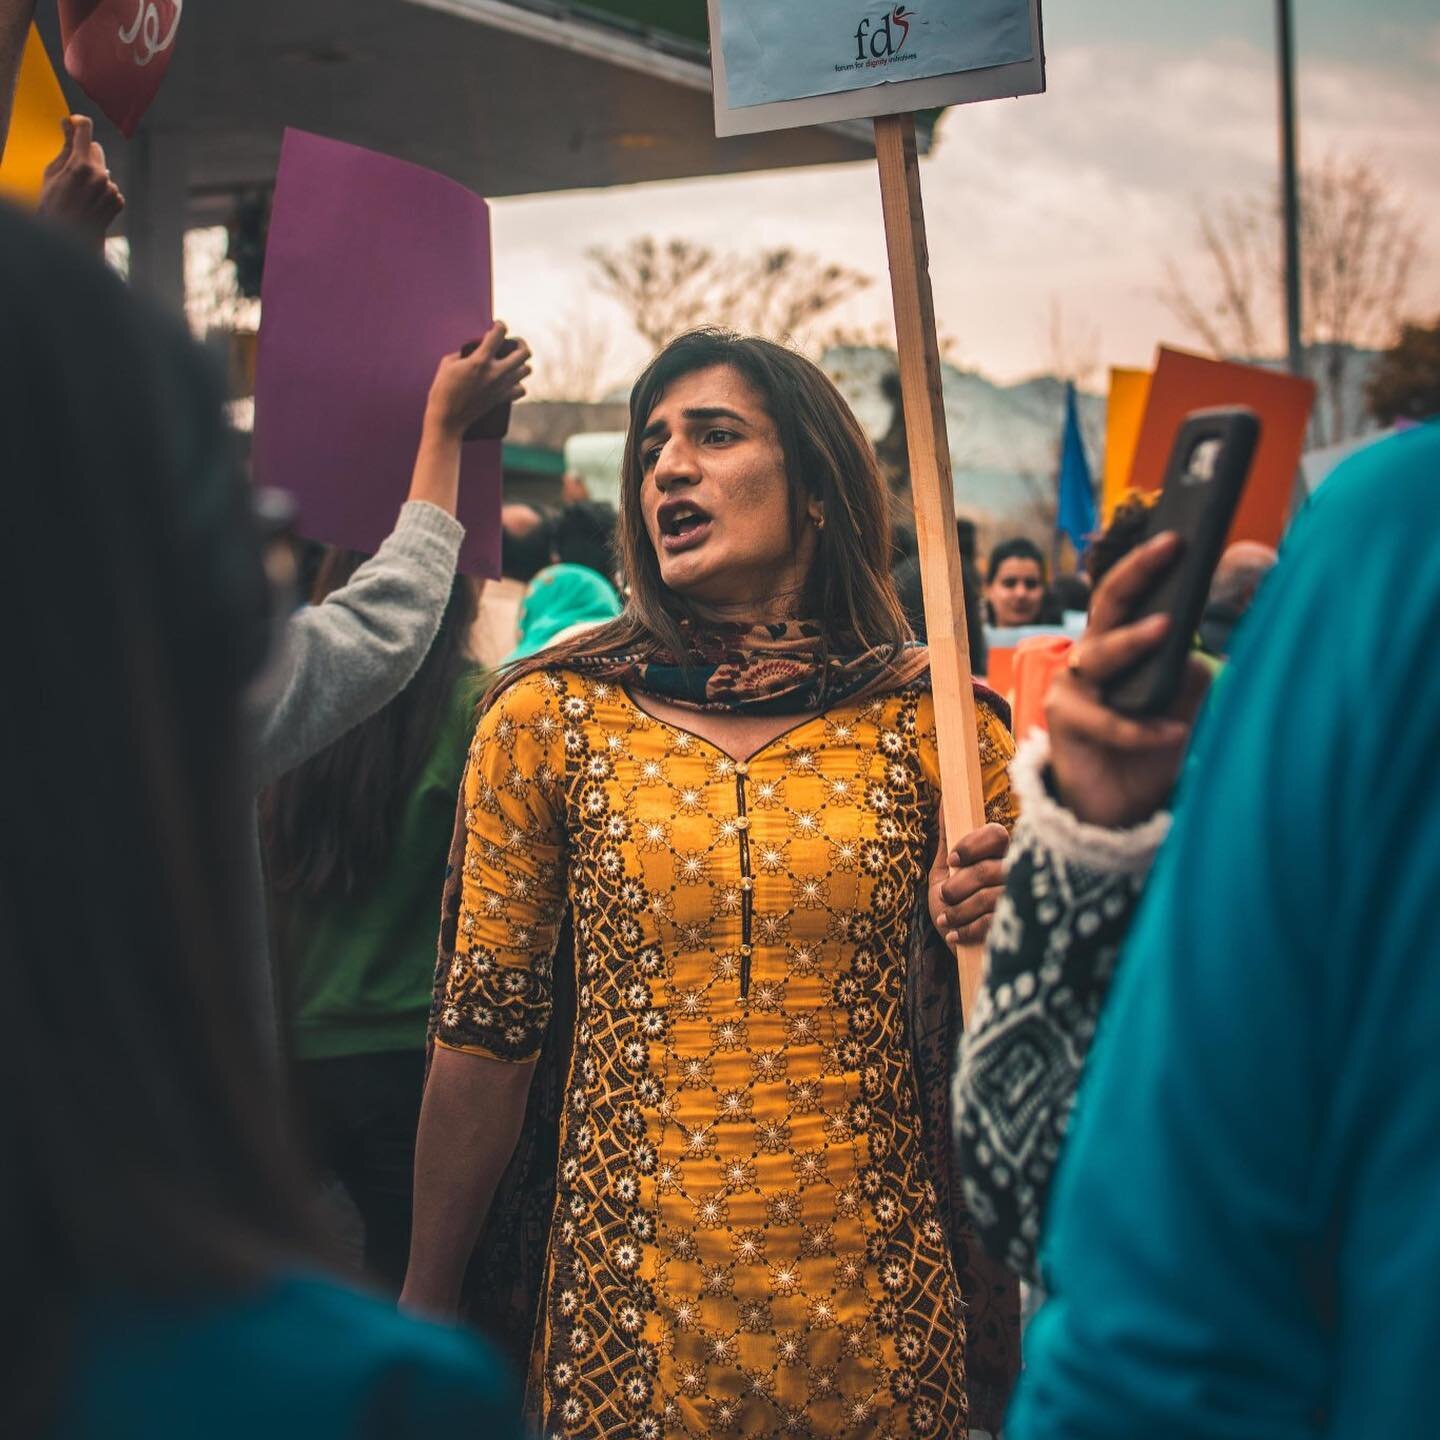 (UPDATE: JULIE HAS BEEN RELEASED!) #JUSTICEFORJULIE‼️ Julie Khan is part of the Khwaja Sira/Trans community and is an activist in Pakistan who has been one of the fiercest voices from the community. She also played an important role in Aurat March.⁣
⁣
She has been arrested by Islamabad police and sent to a men&rsquo;s prison over fabricated evidence and false charges. The incident took place after her friend, Rosy, was beaten without any reason.⁣ 
⁣
This is yet another example of how the lgbtq+ (specifically the khwaja sira/trans community) are victims of abuse, harassment, and murder without any law or regulation to favor their rights. WE DEMAND JUSTICE!⁣ image credits: @theselfassumedartist 
⁣
SPREAD AWARENESS! #justiceforjulie #hijra #transrightsarehumanrights #trans #lgbtq #southasia #pakistan